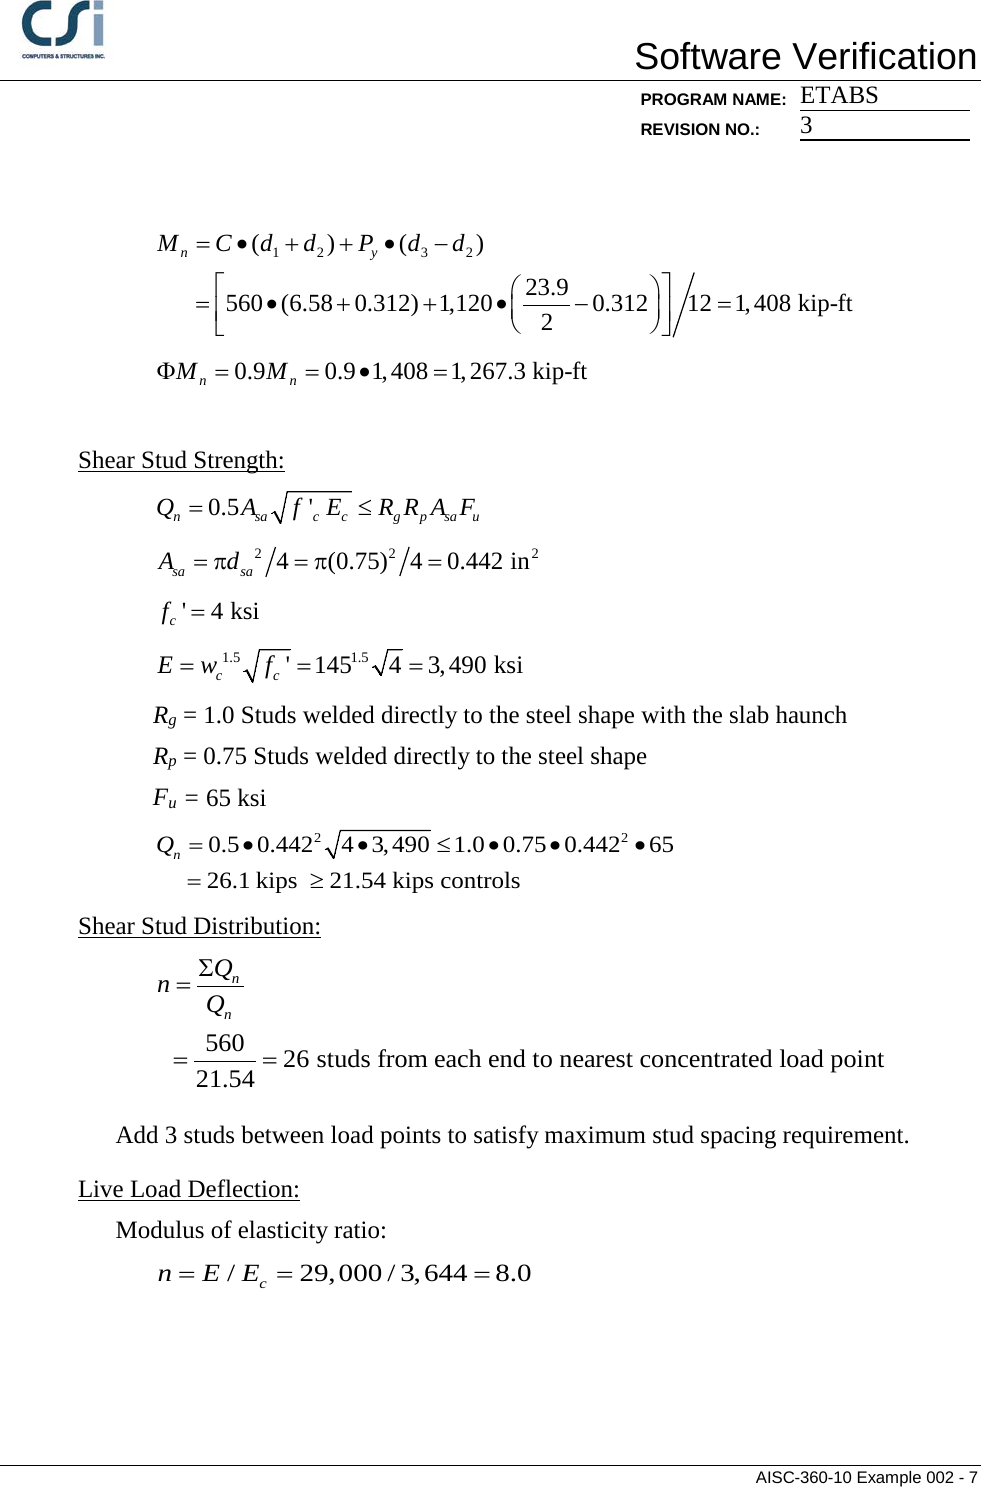 Page 7 of 8 - Contents AISC-360-10 Example 002